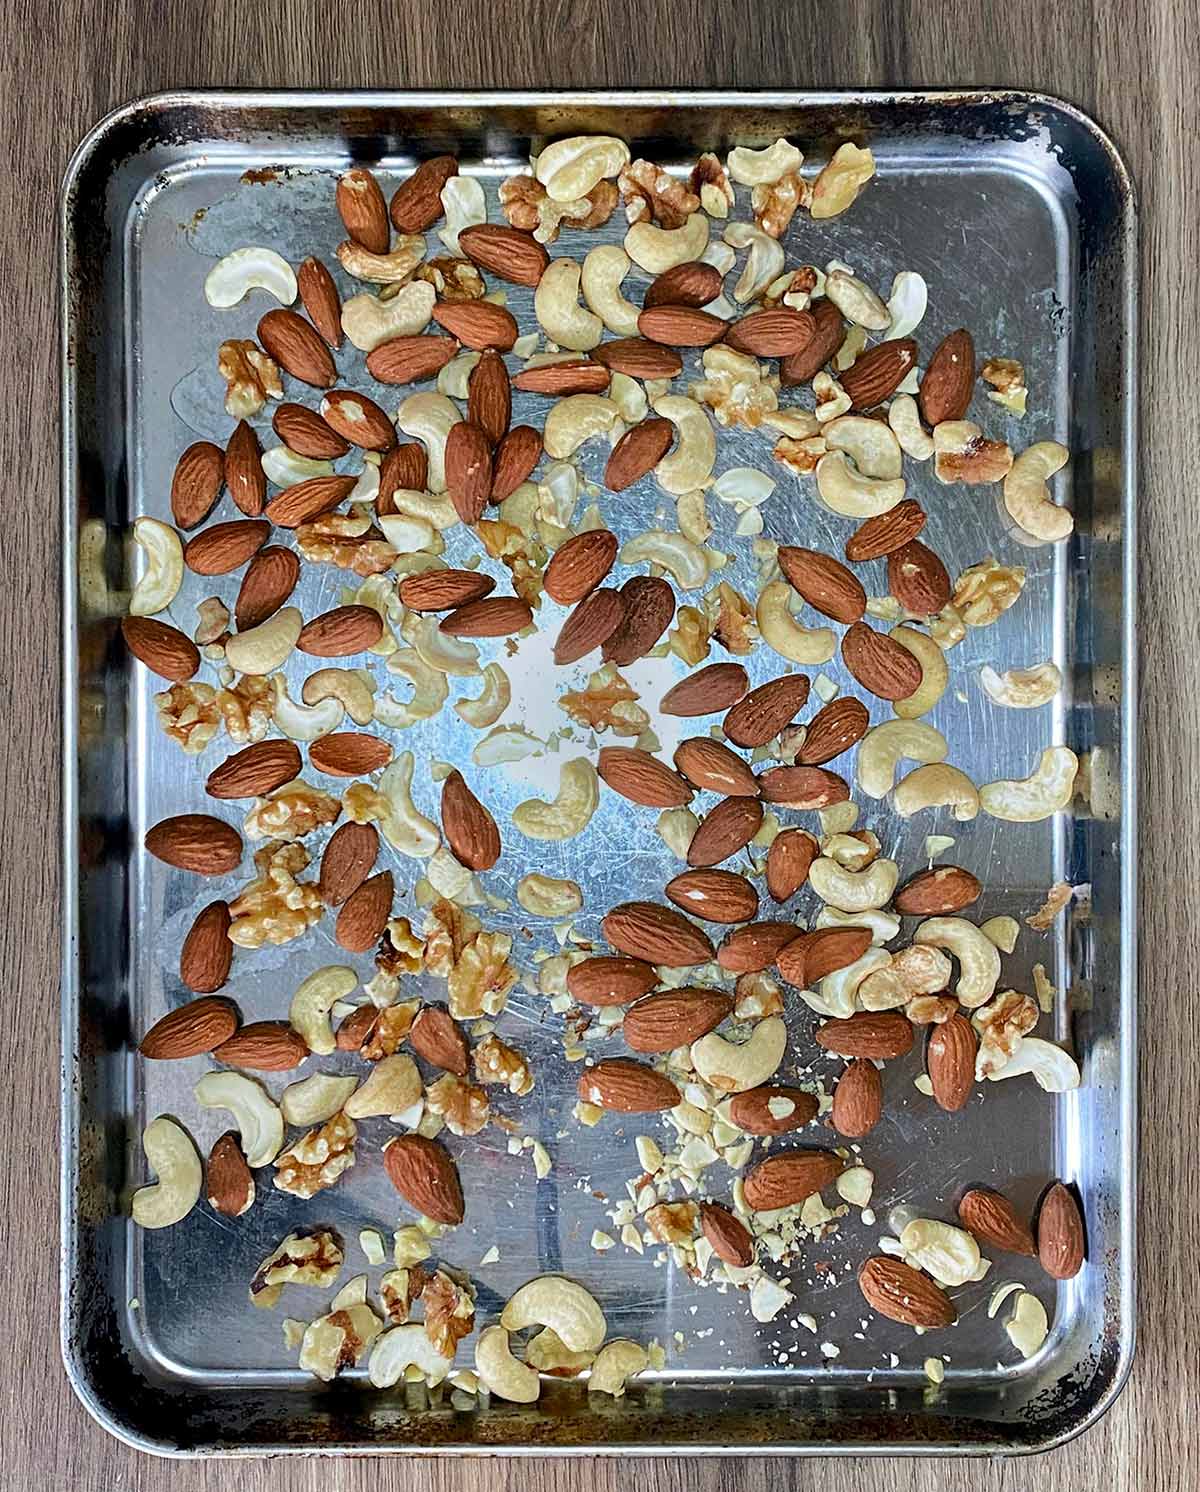 A selection of mixed nuts on a baking sheet.